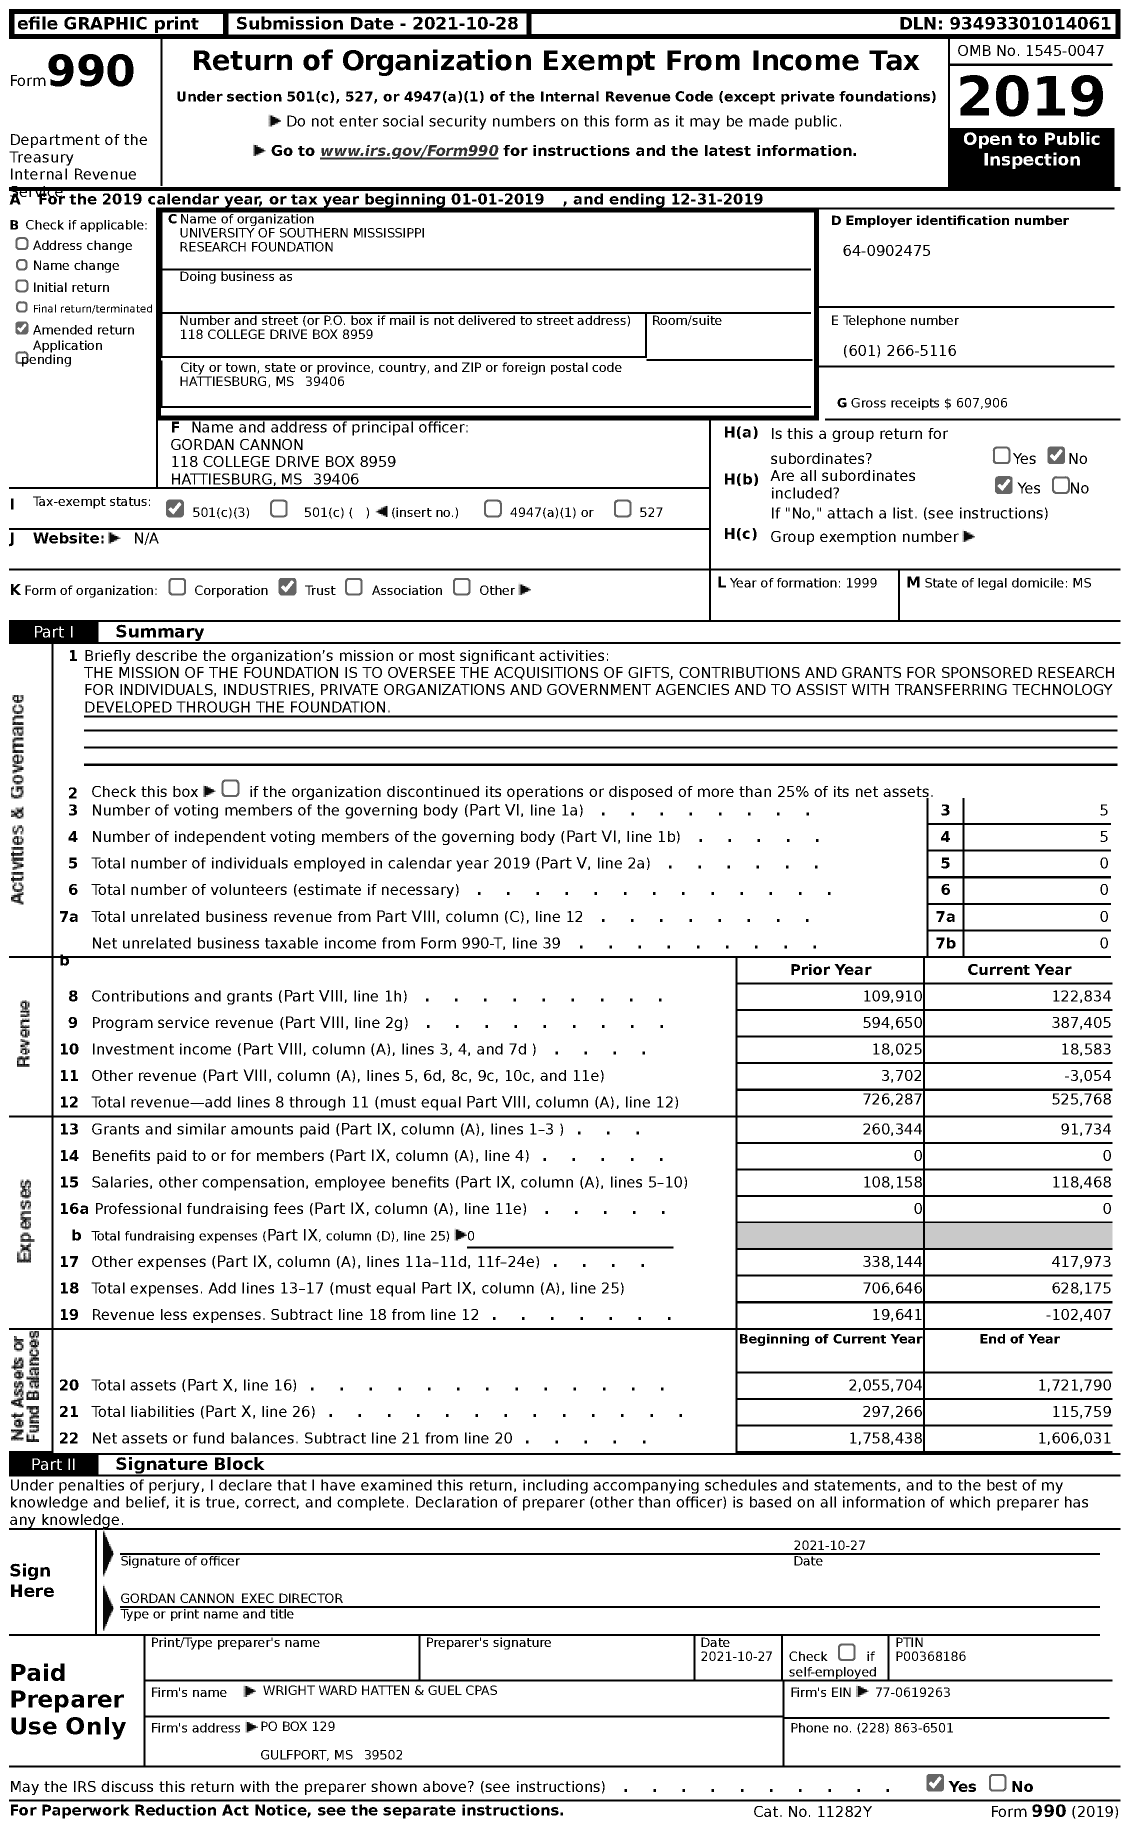 Image of first page of 2019 Form 990 for University of Southern Mississippi Research Foundation